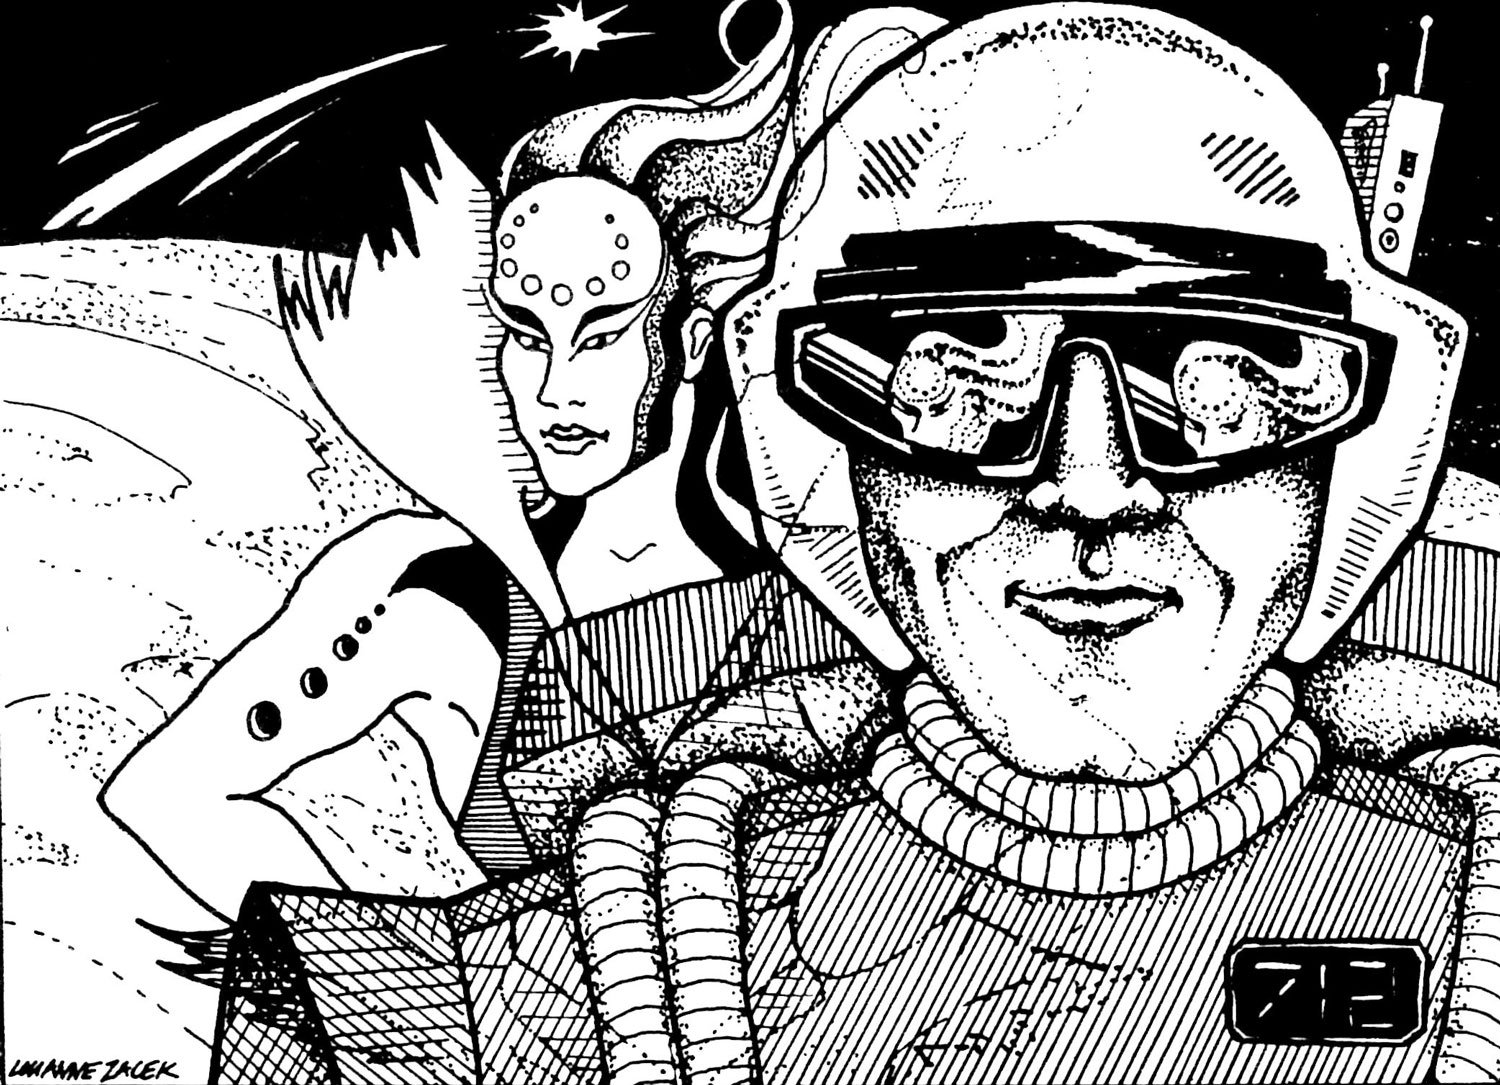  Pen and ink illustrations from the 1980s evoke the spirit of epic space adventures within the Takamo universe. 